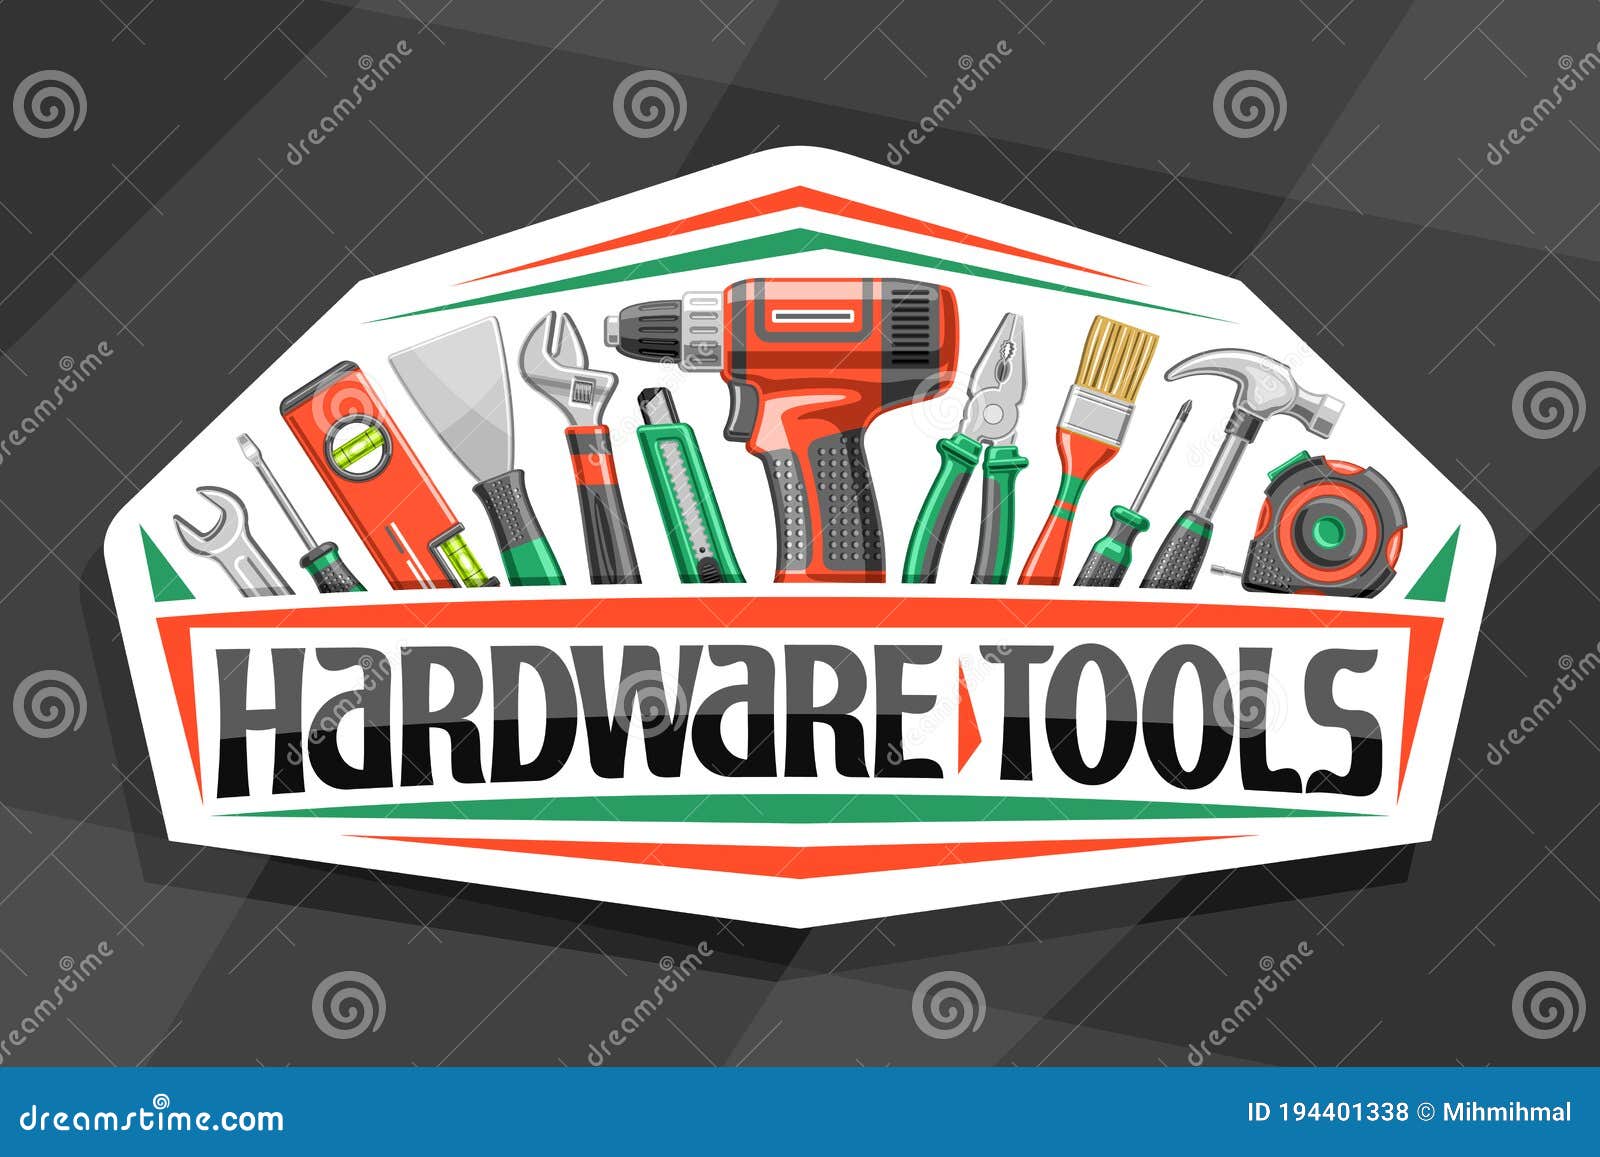  logo for hardware tools